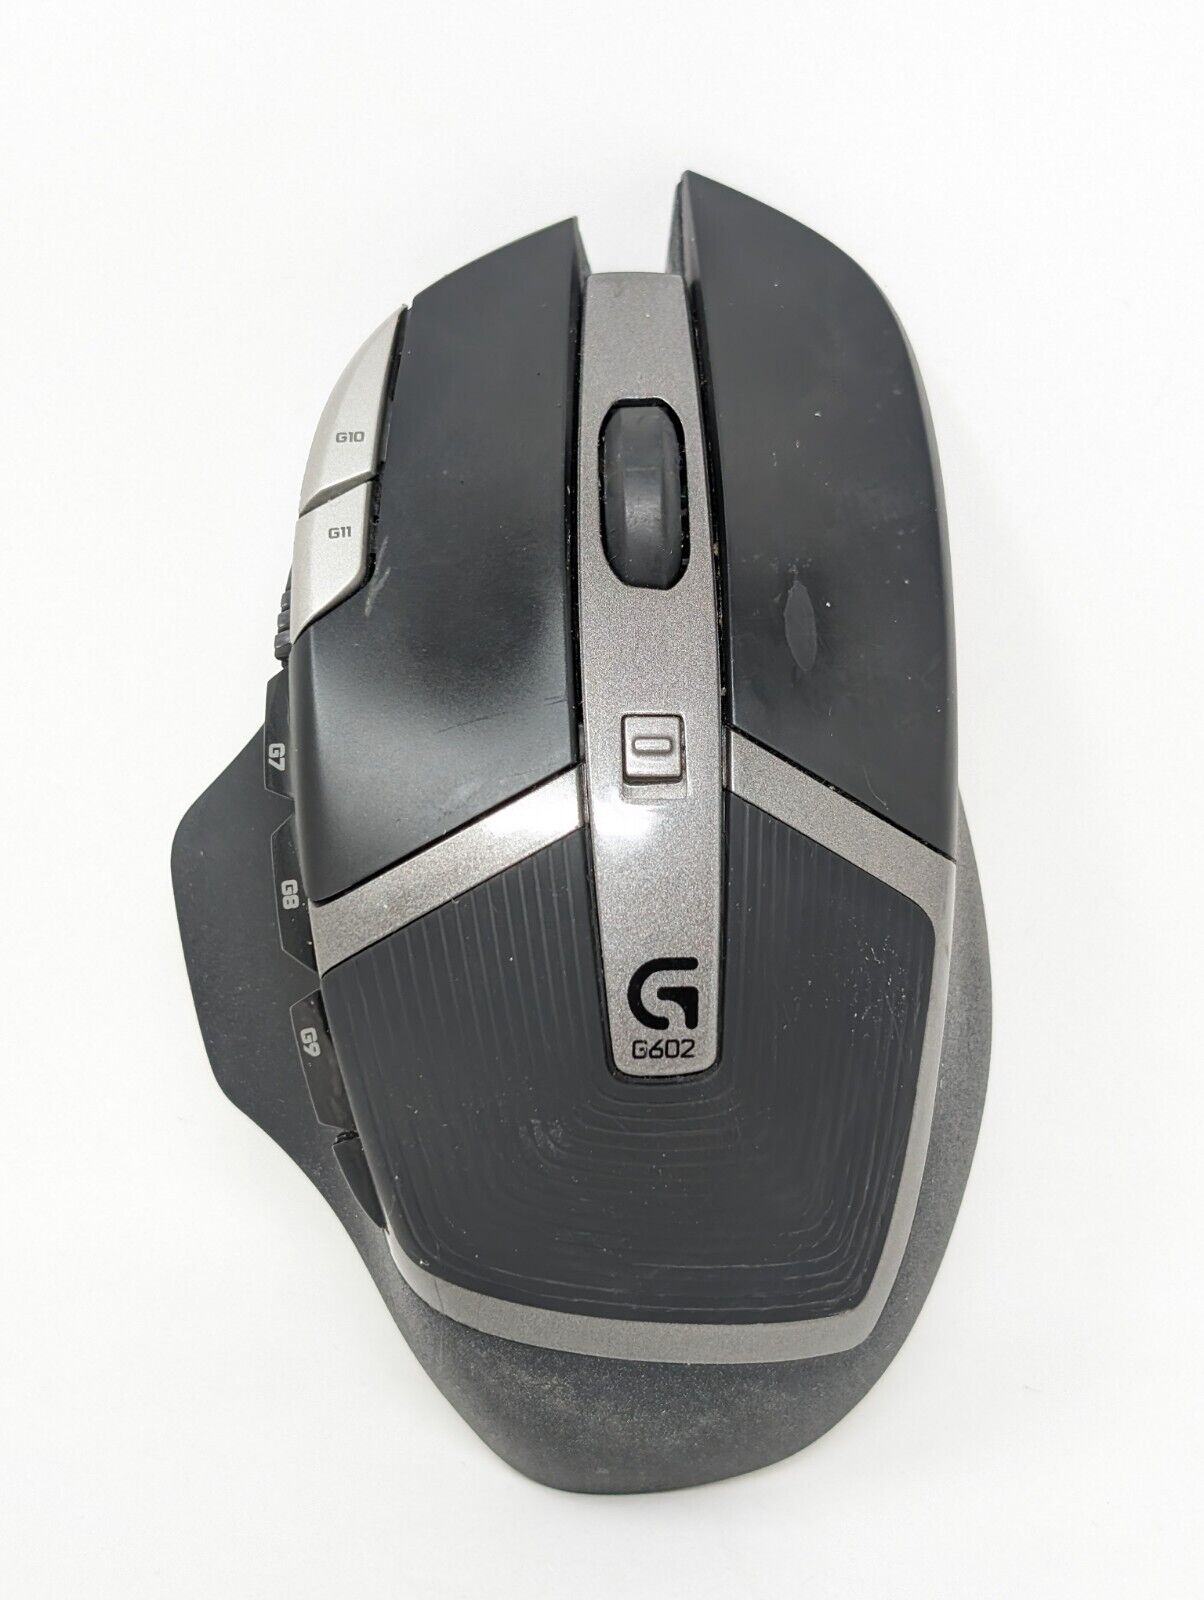 Logitech G602 Wireless Gaming Mouse - NO USB Receiver